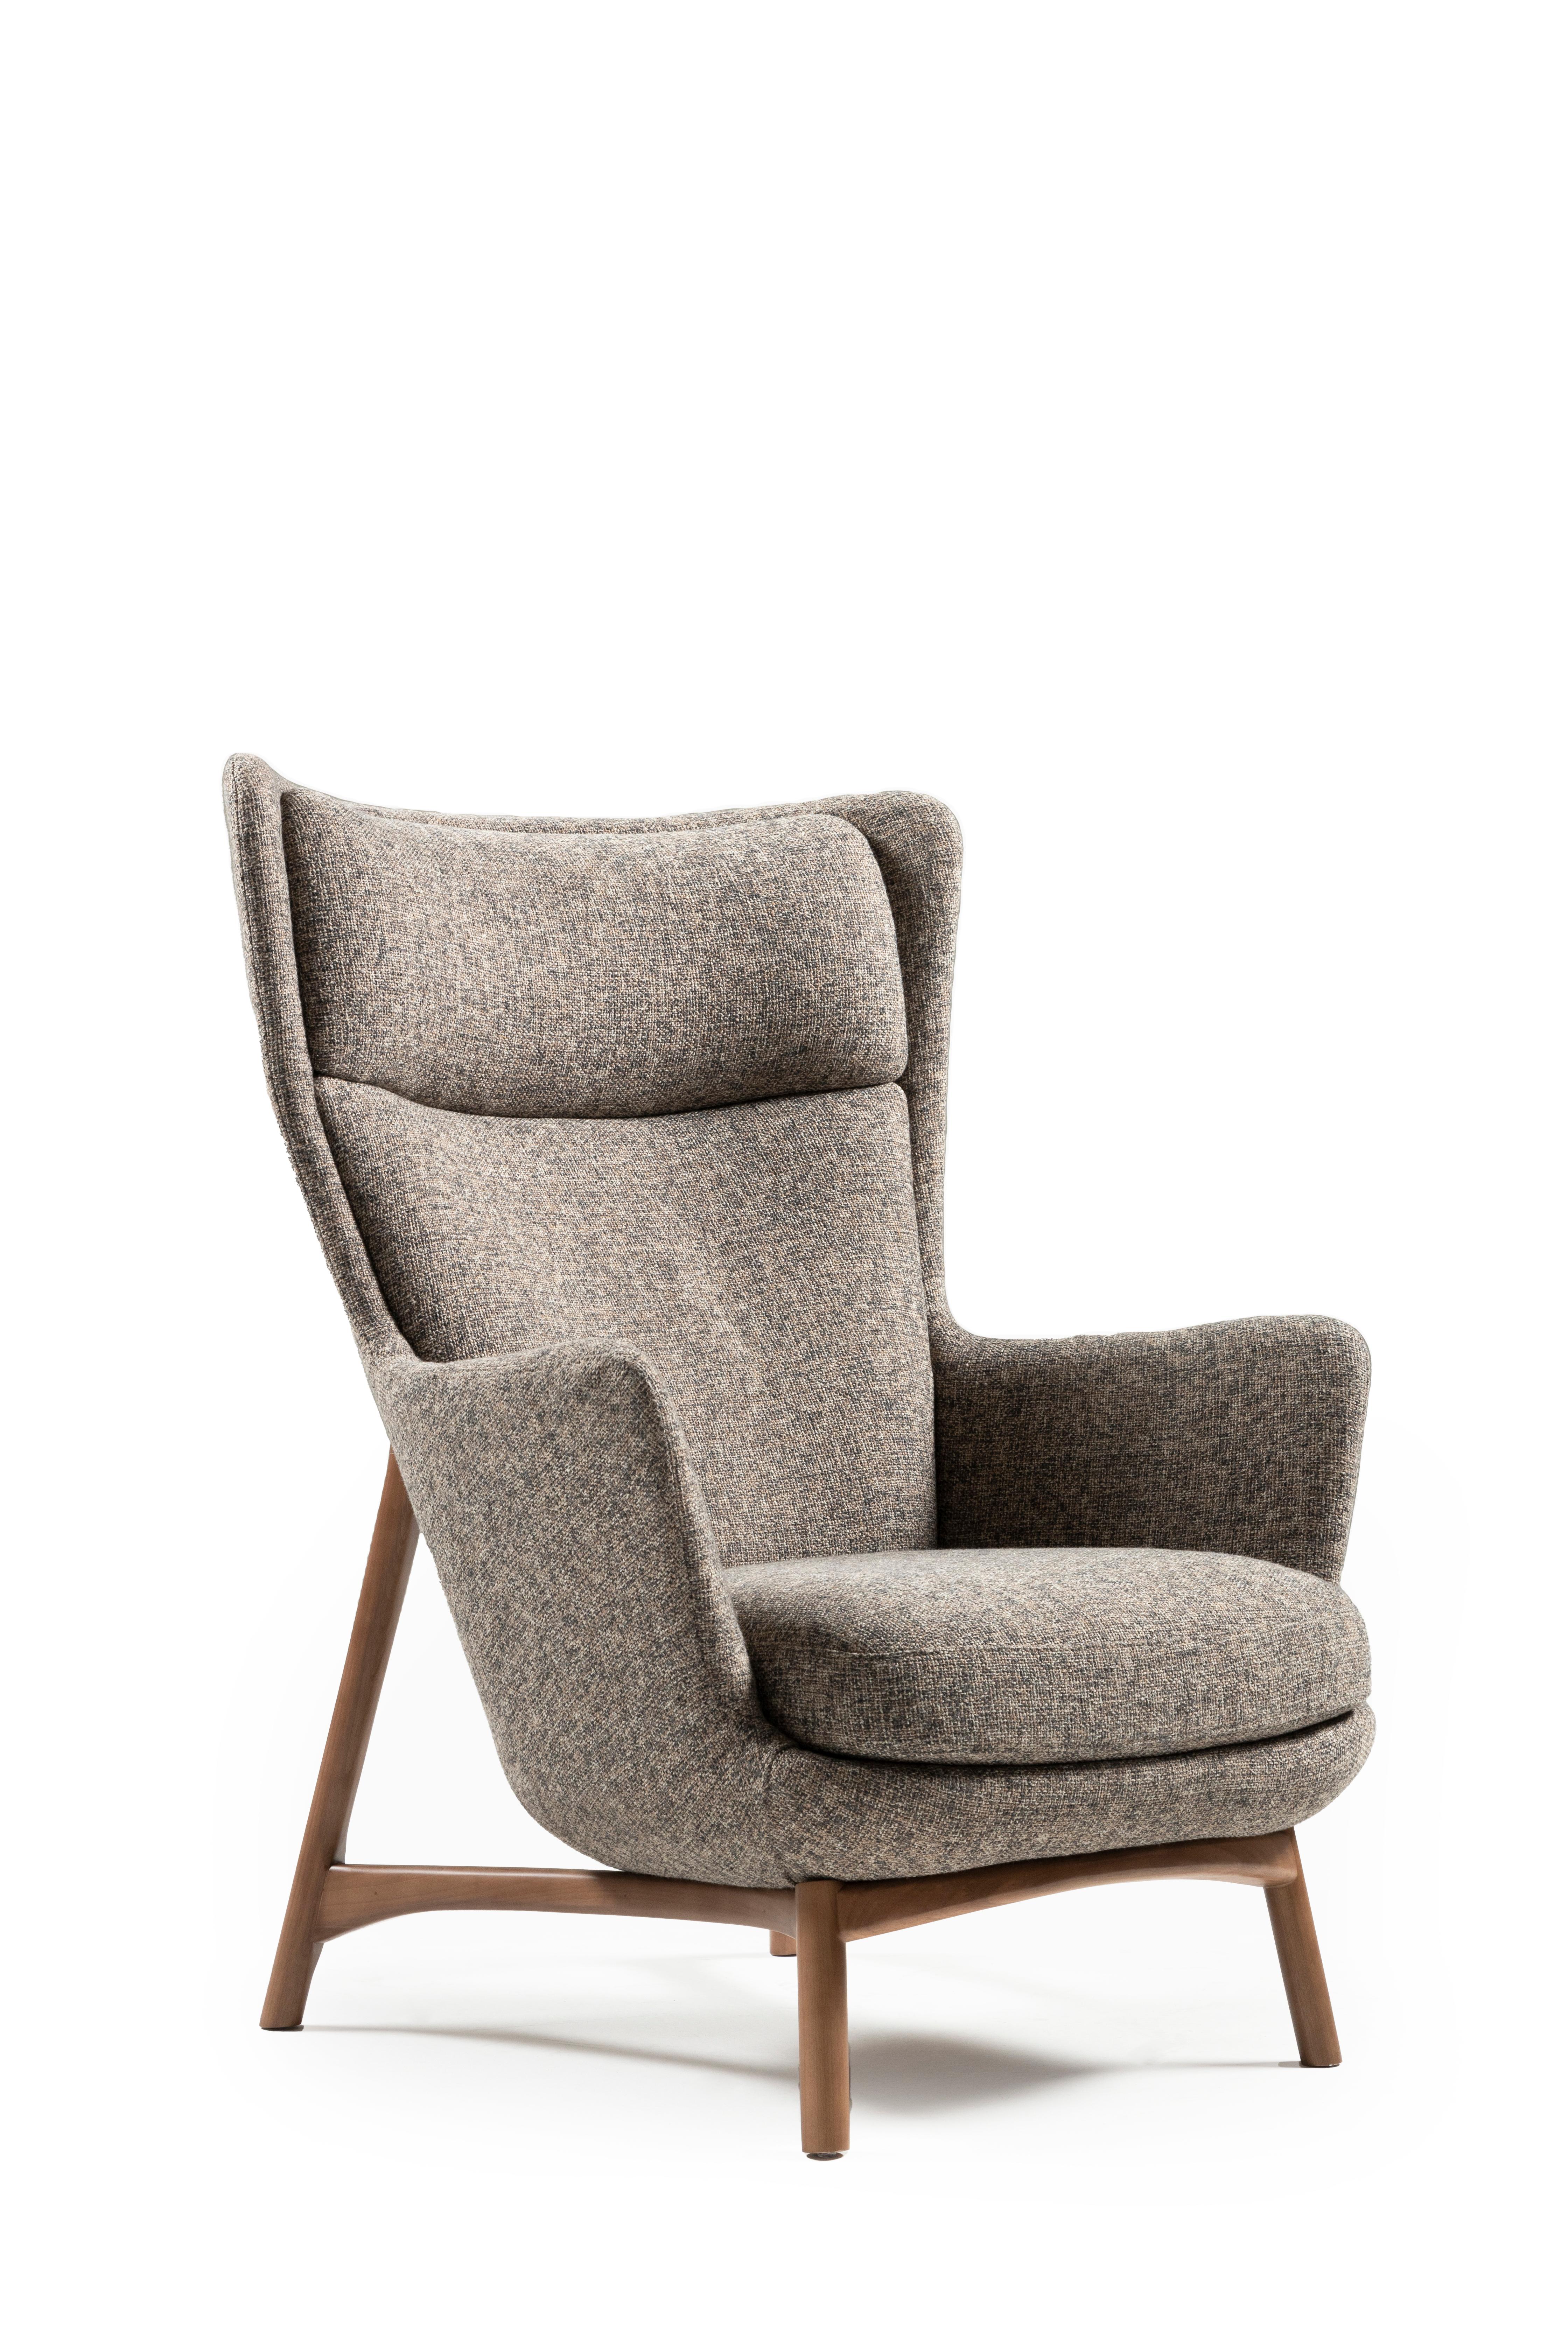 Sublime Armchairs, Contemporary Style in Solid Wood, Textiles Upholstery.  For Sale 2